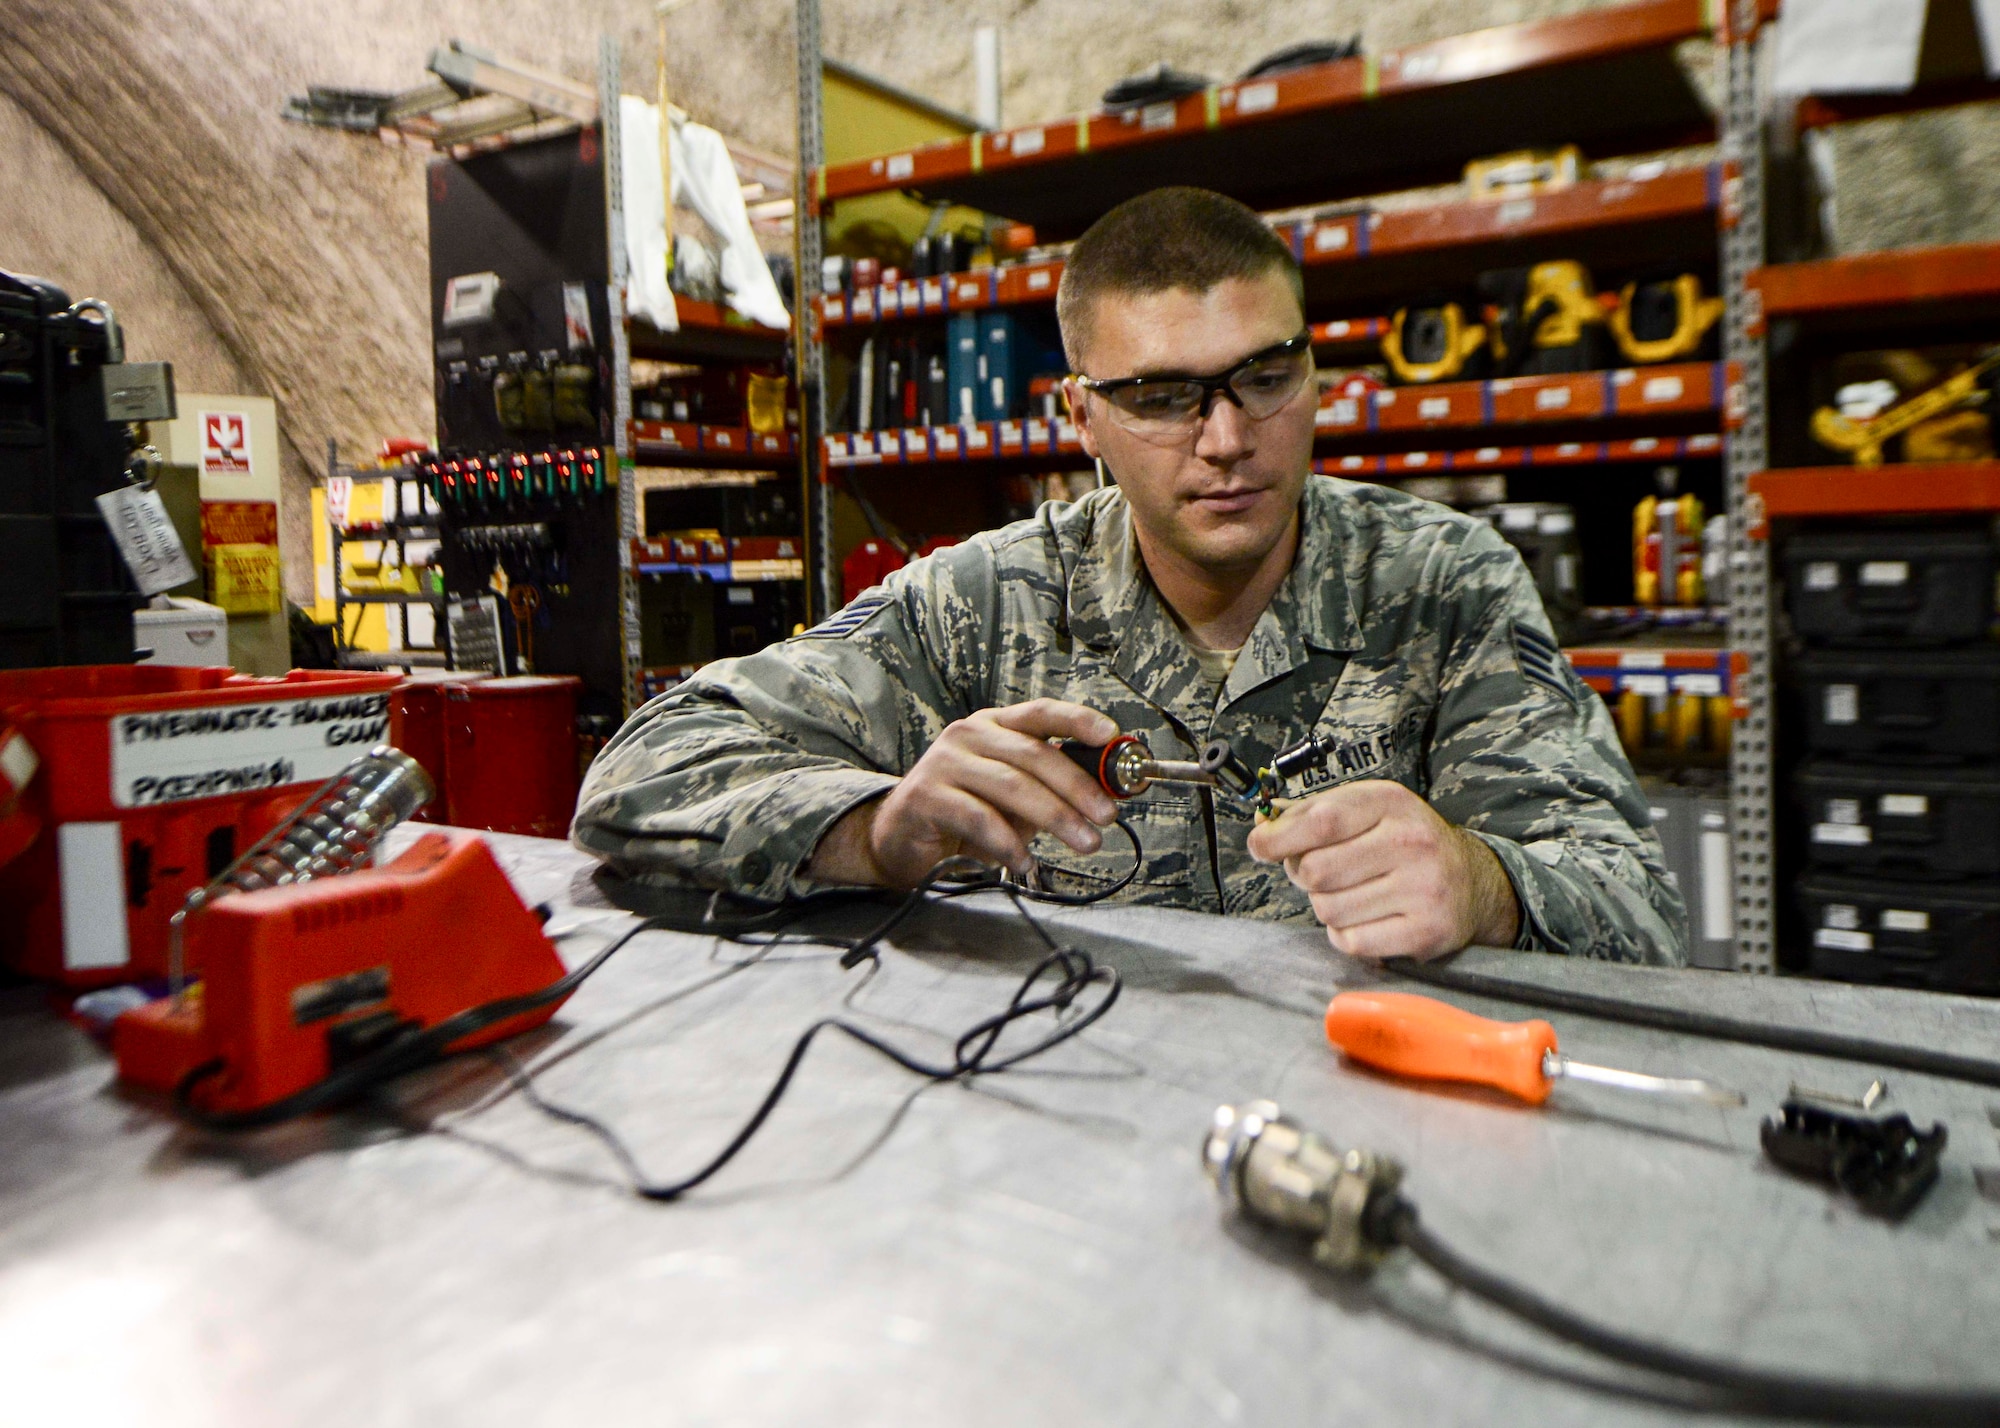 Staff Sgt. Taylor Elia, 379th Expeditionary Aircraft Maintenance Squadron communication navigation mission systems specialist, fixes a communication cord at the repair reference shop Aug. 12, 2016, at Al Udeid Air Base, Qatar. Airmen from the 379th EAMXS are responsible for ensuring the aircraft are maintained to exact standards to support Operation Inherent Resolve and Operations Freedom’s Sentinel. (U.S. Air Force photo/Senior Airman Janelle Patiño/Released)